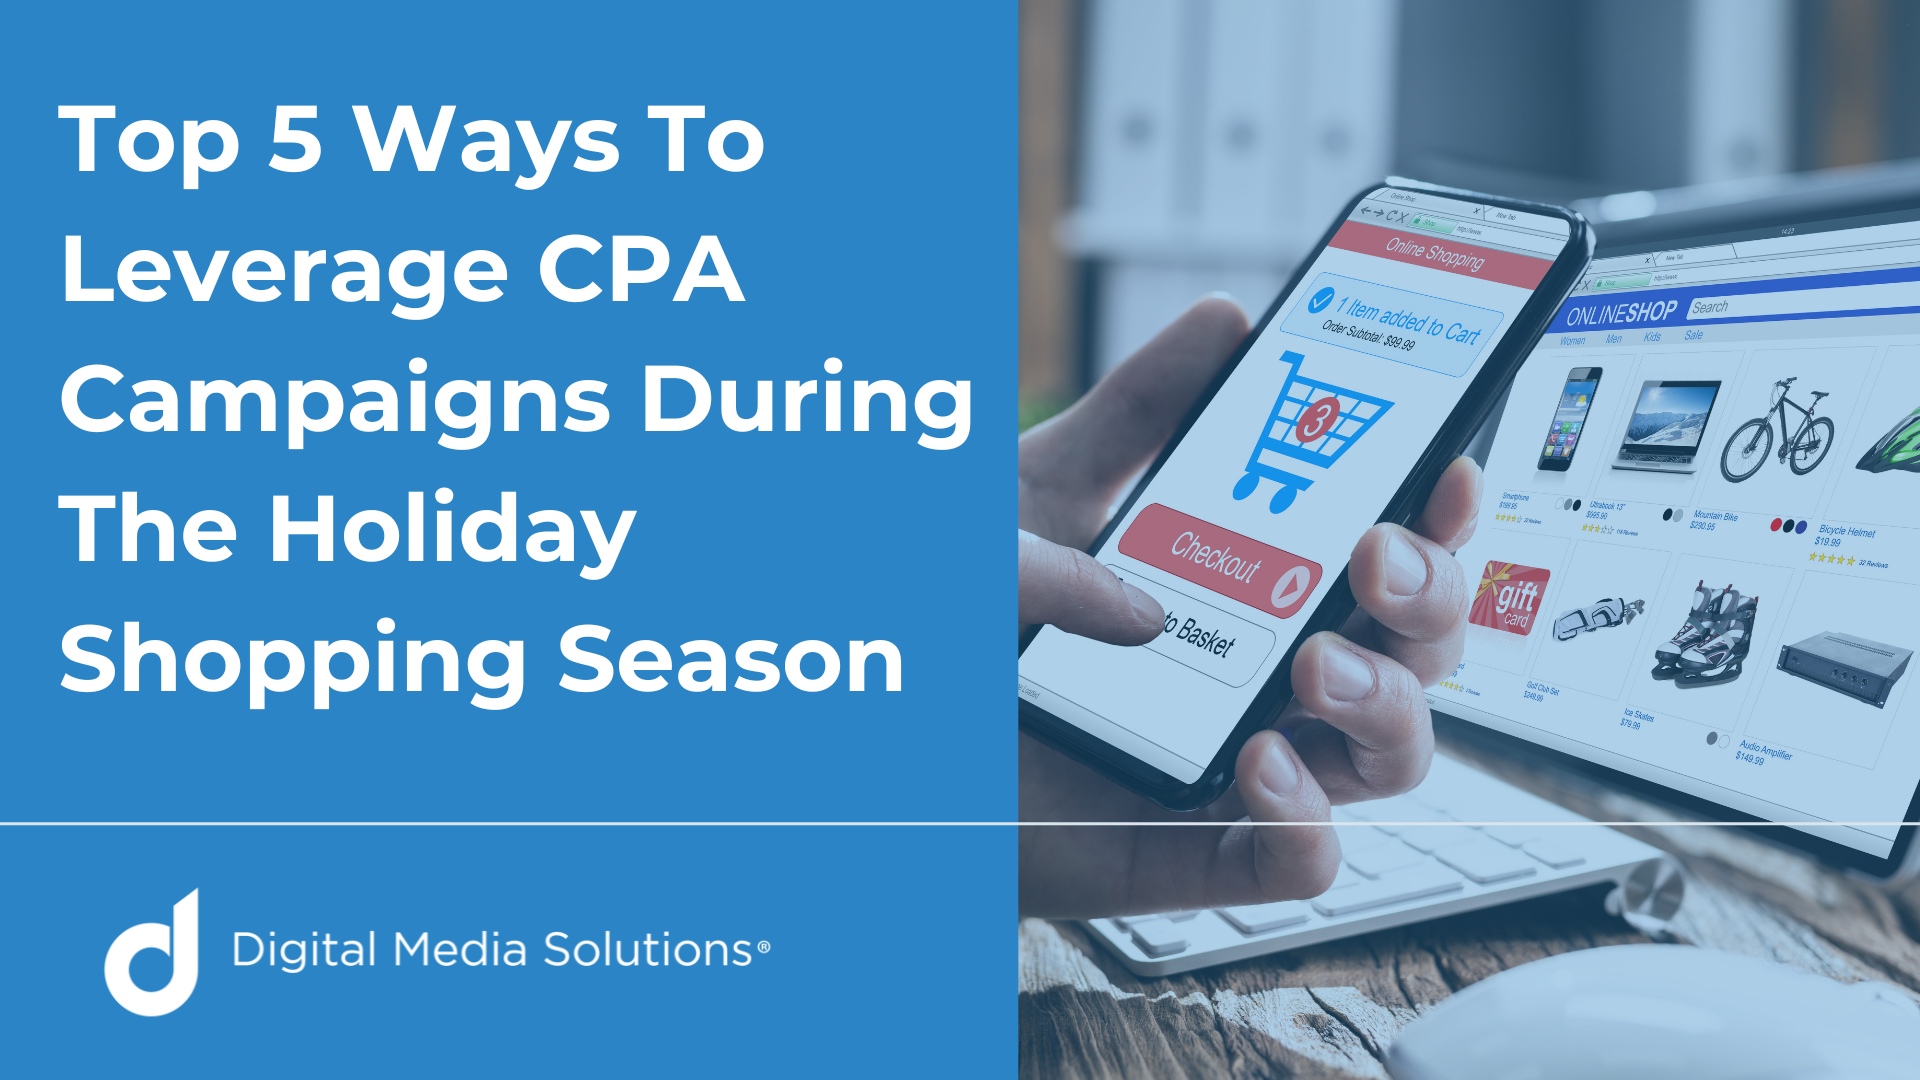 Top 5 Ways To Leverage CPA Campaigns During The Holiday Shopping Season